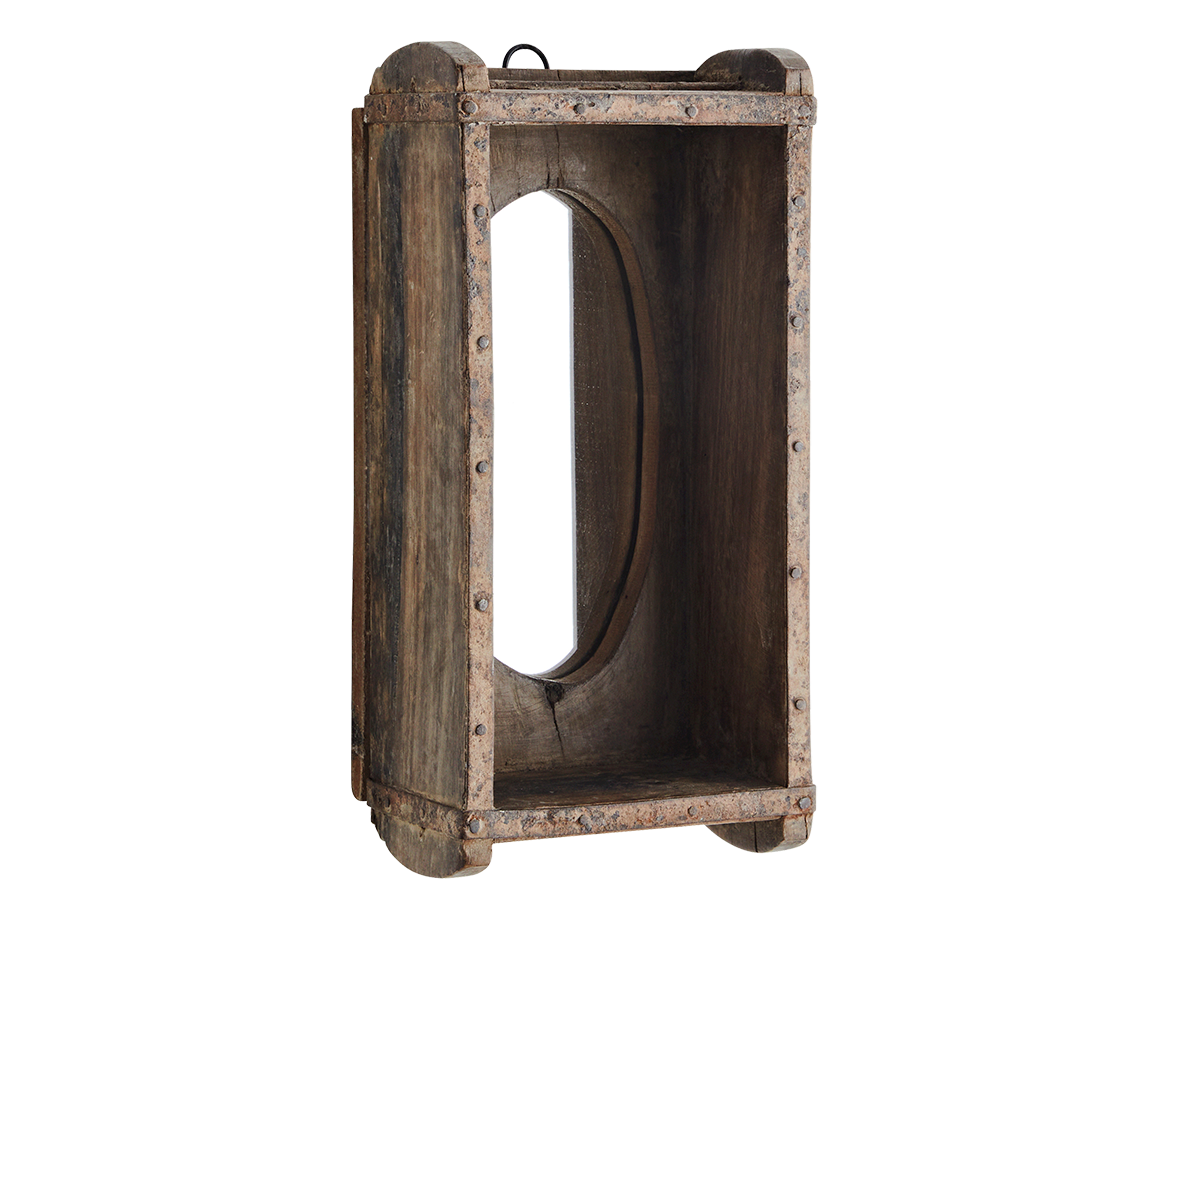 Upcycled brick mould w/ mirror